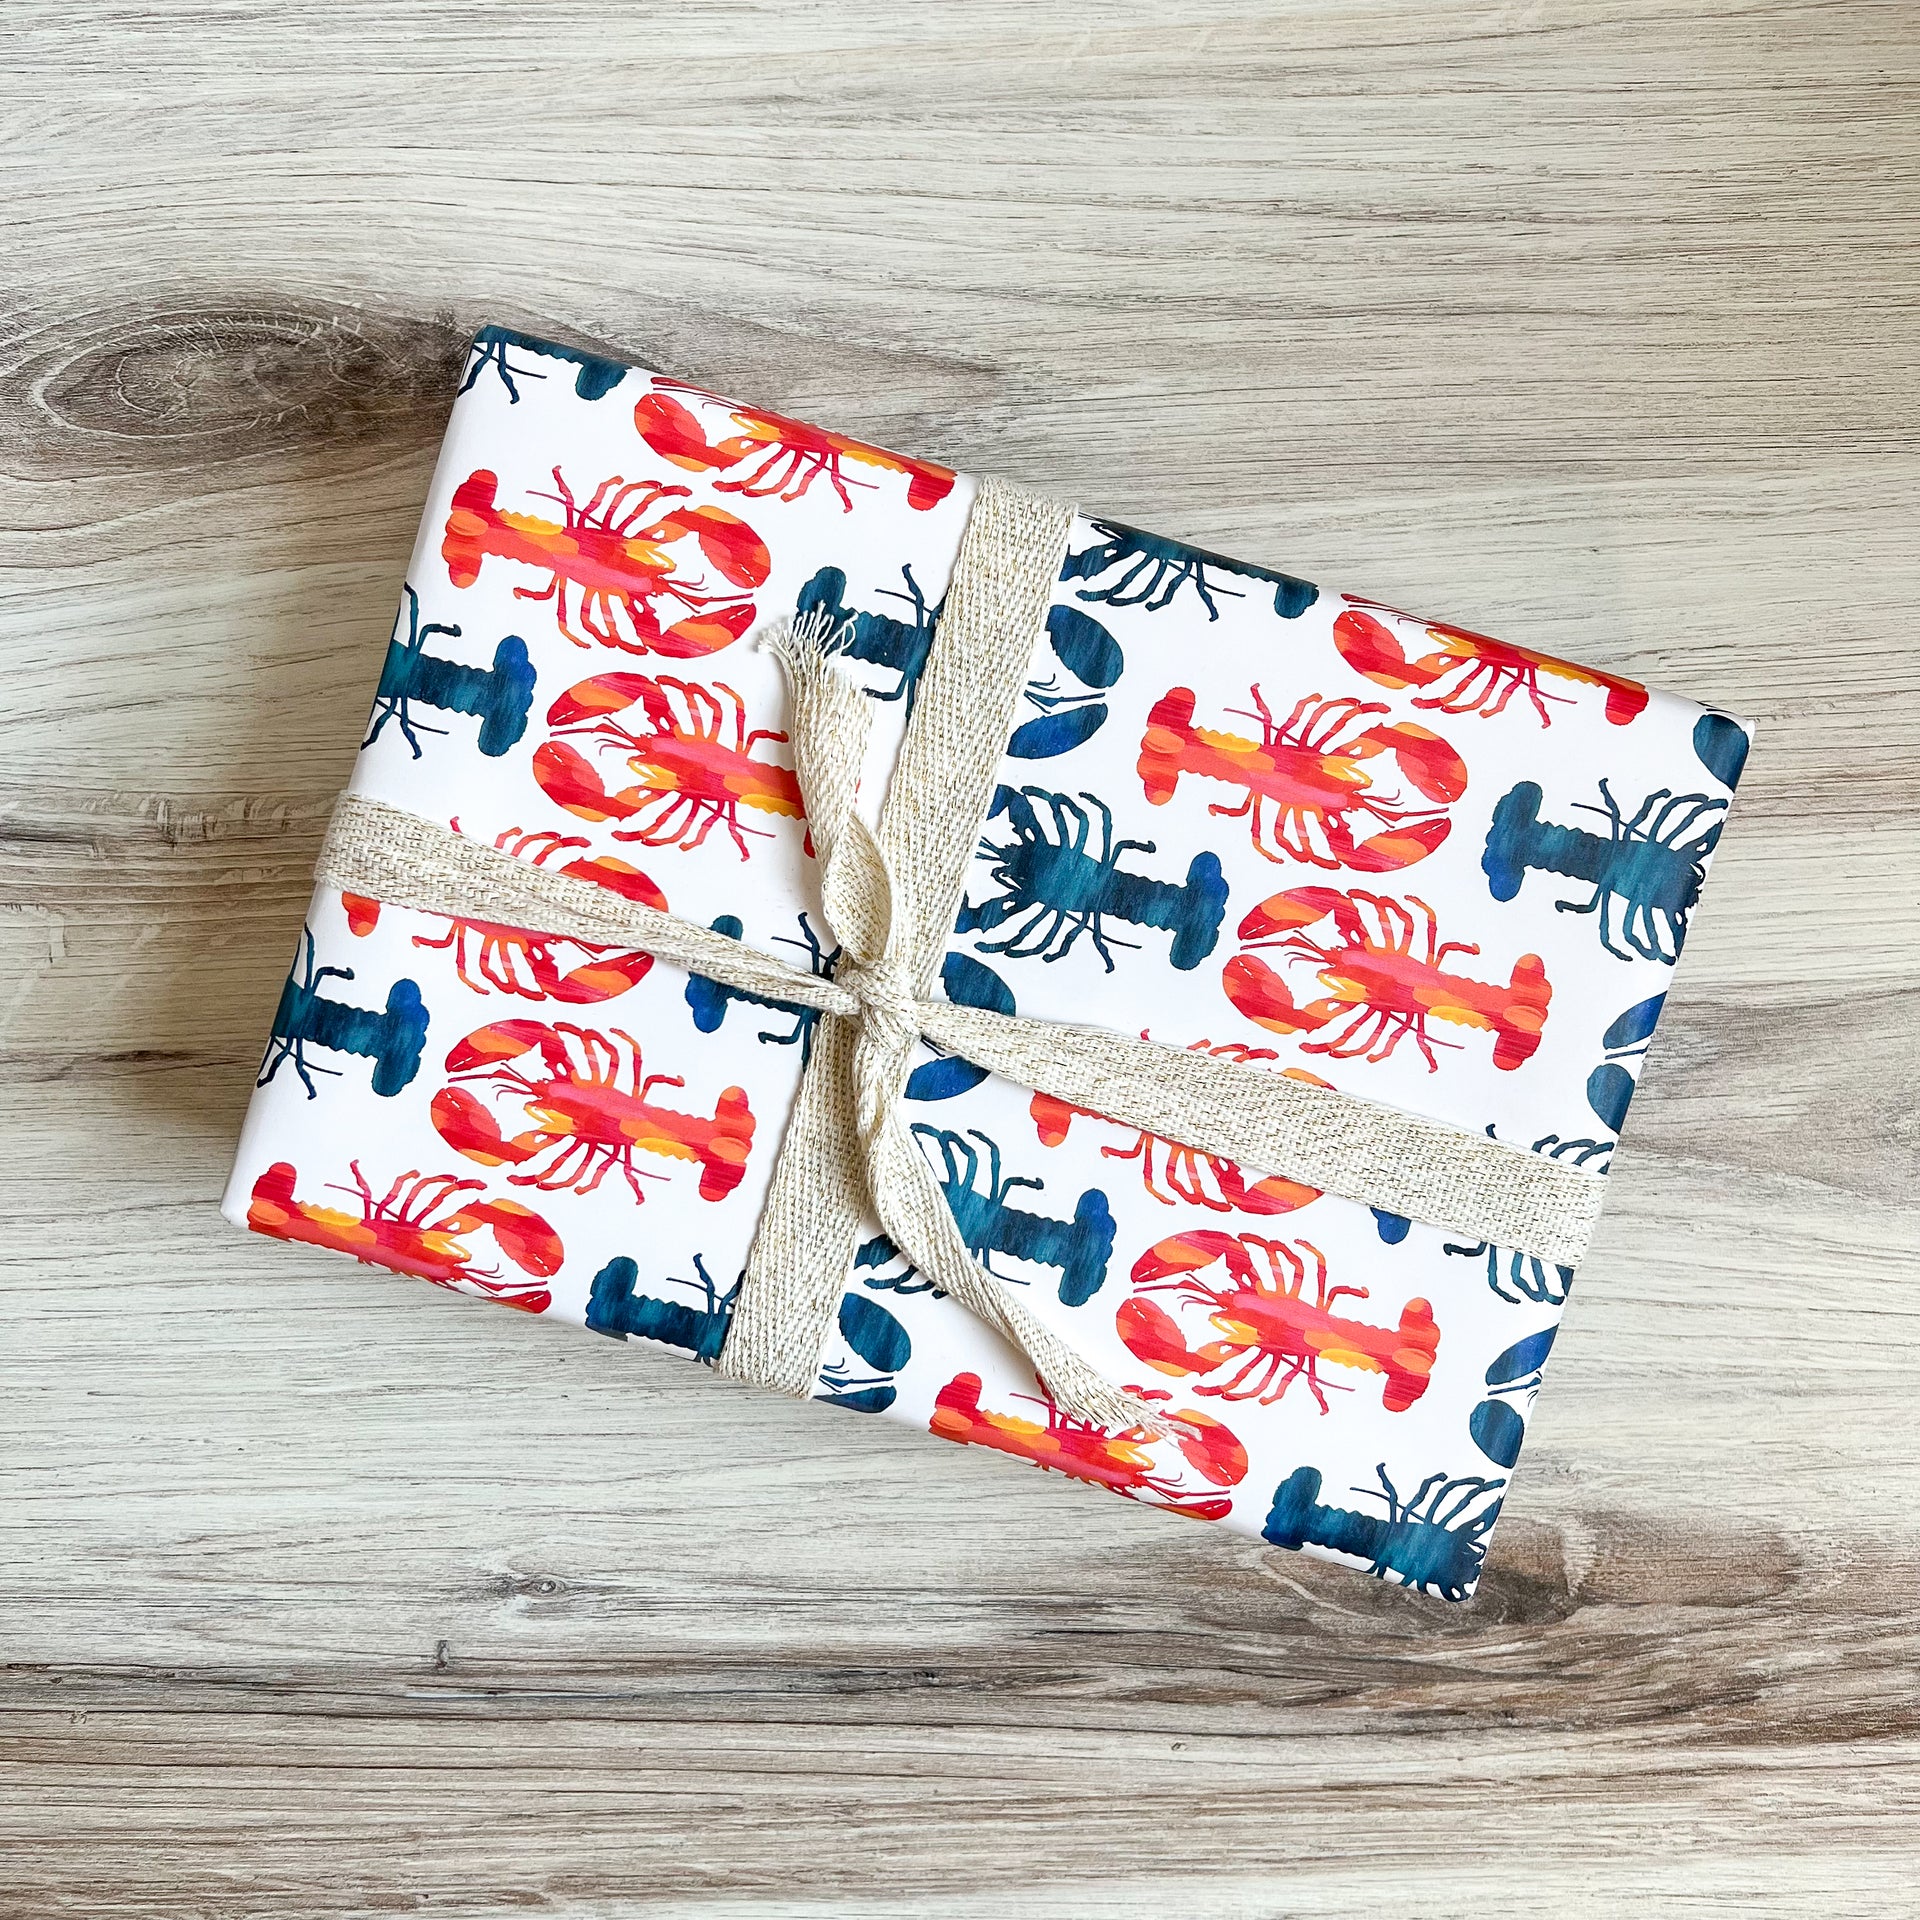 Rock Paper Scissors Lobster Crab Funny Premium Gift Wrap Wrapping Paper Roll